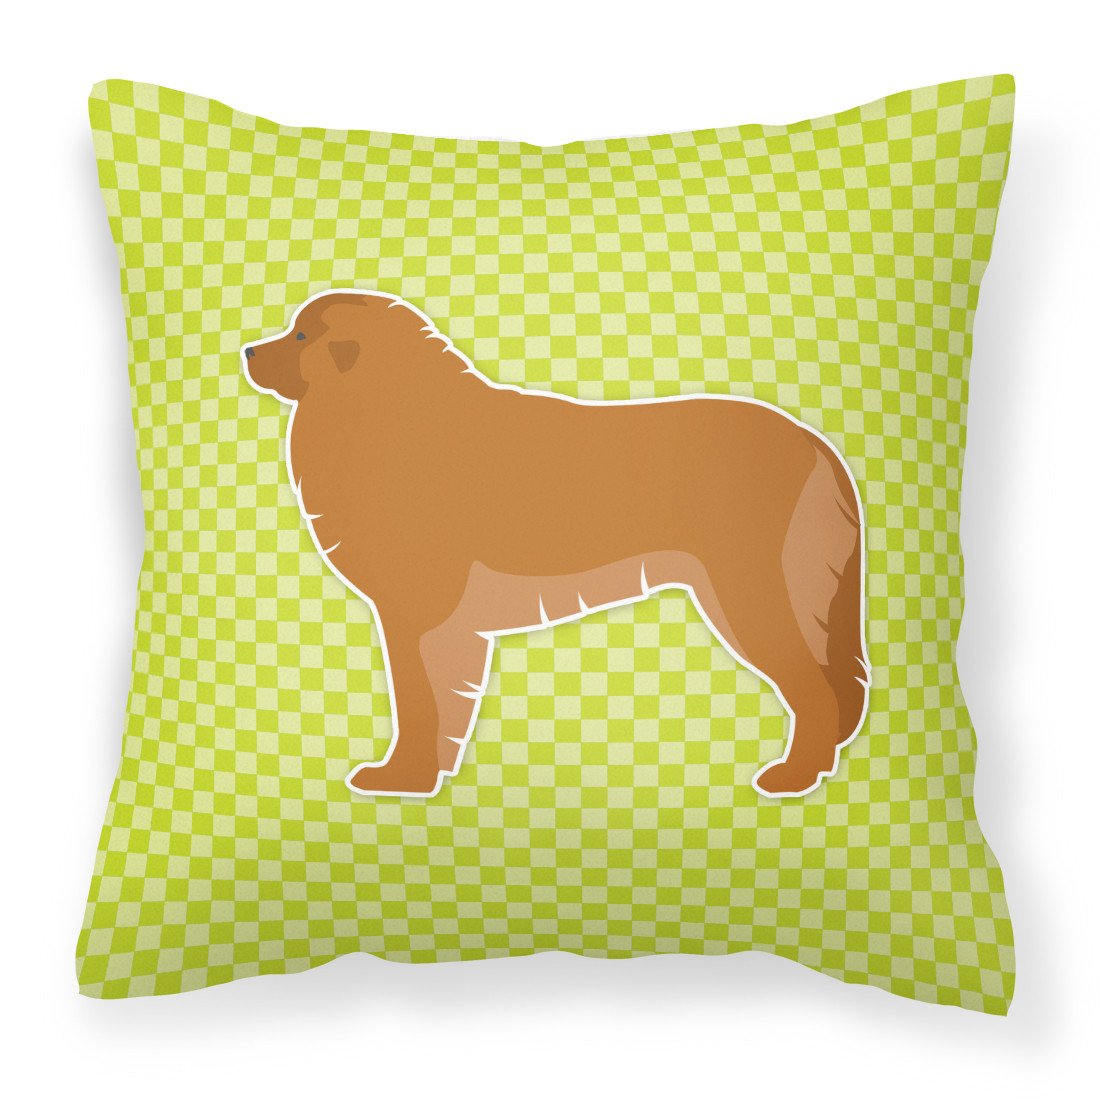 Leonberger Checkerboard Green Fabric Decorative Pillow BB3858PW1818 by Caroline's Treasures